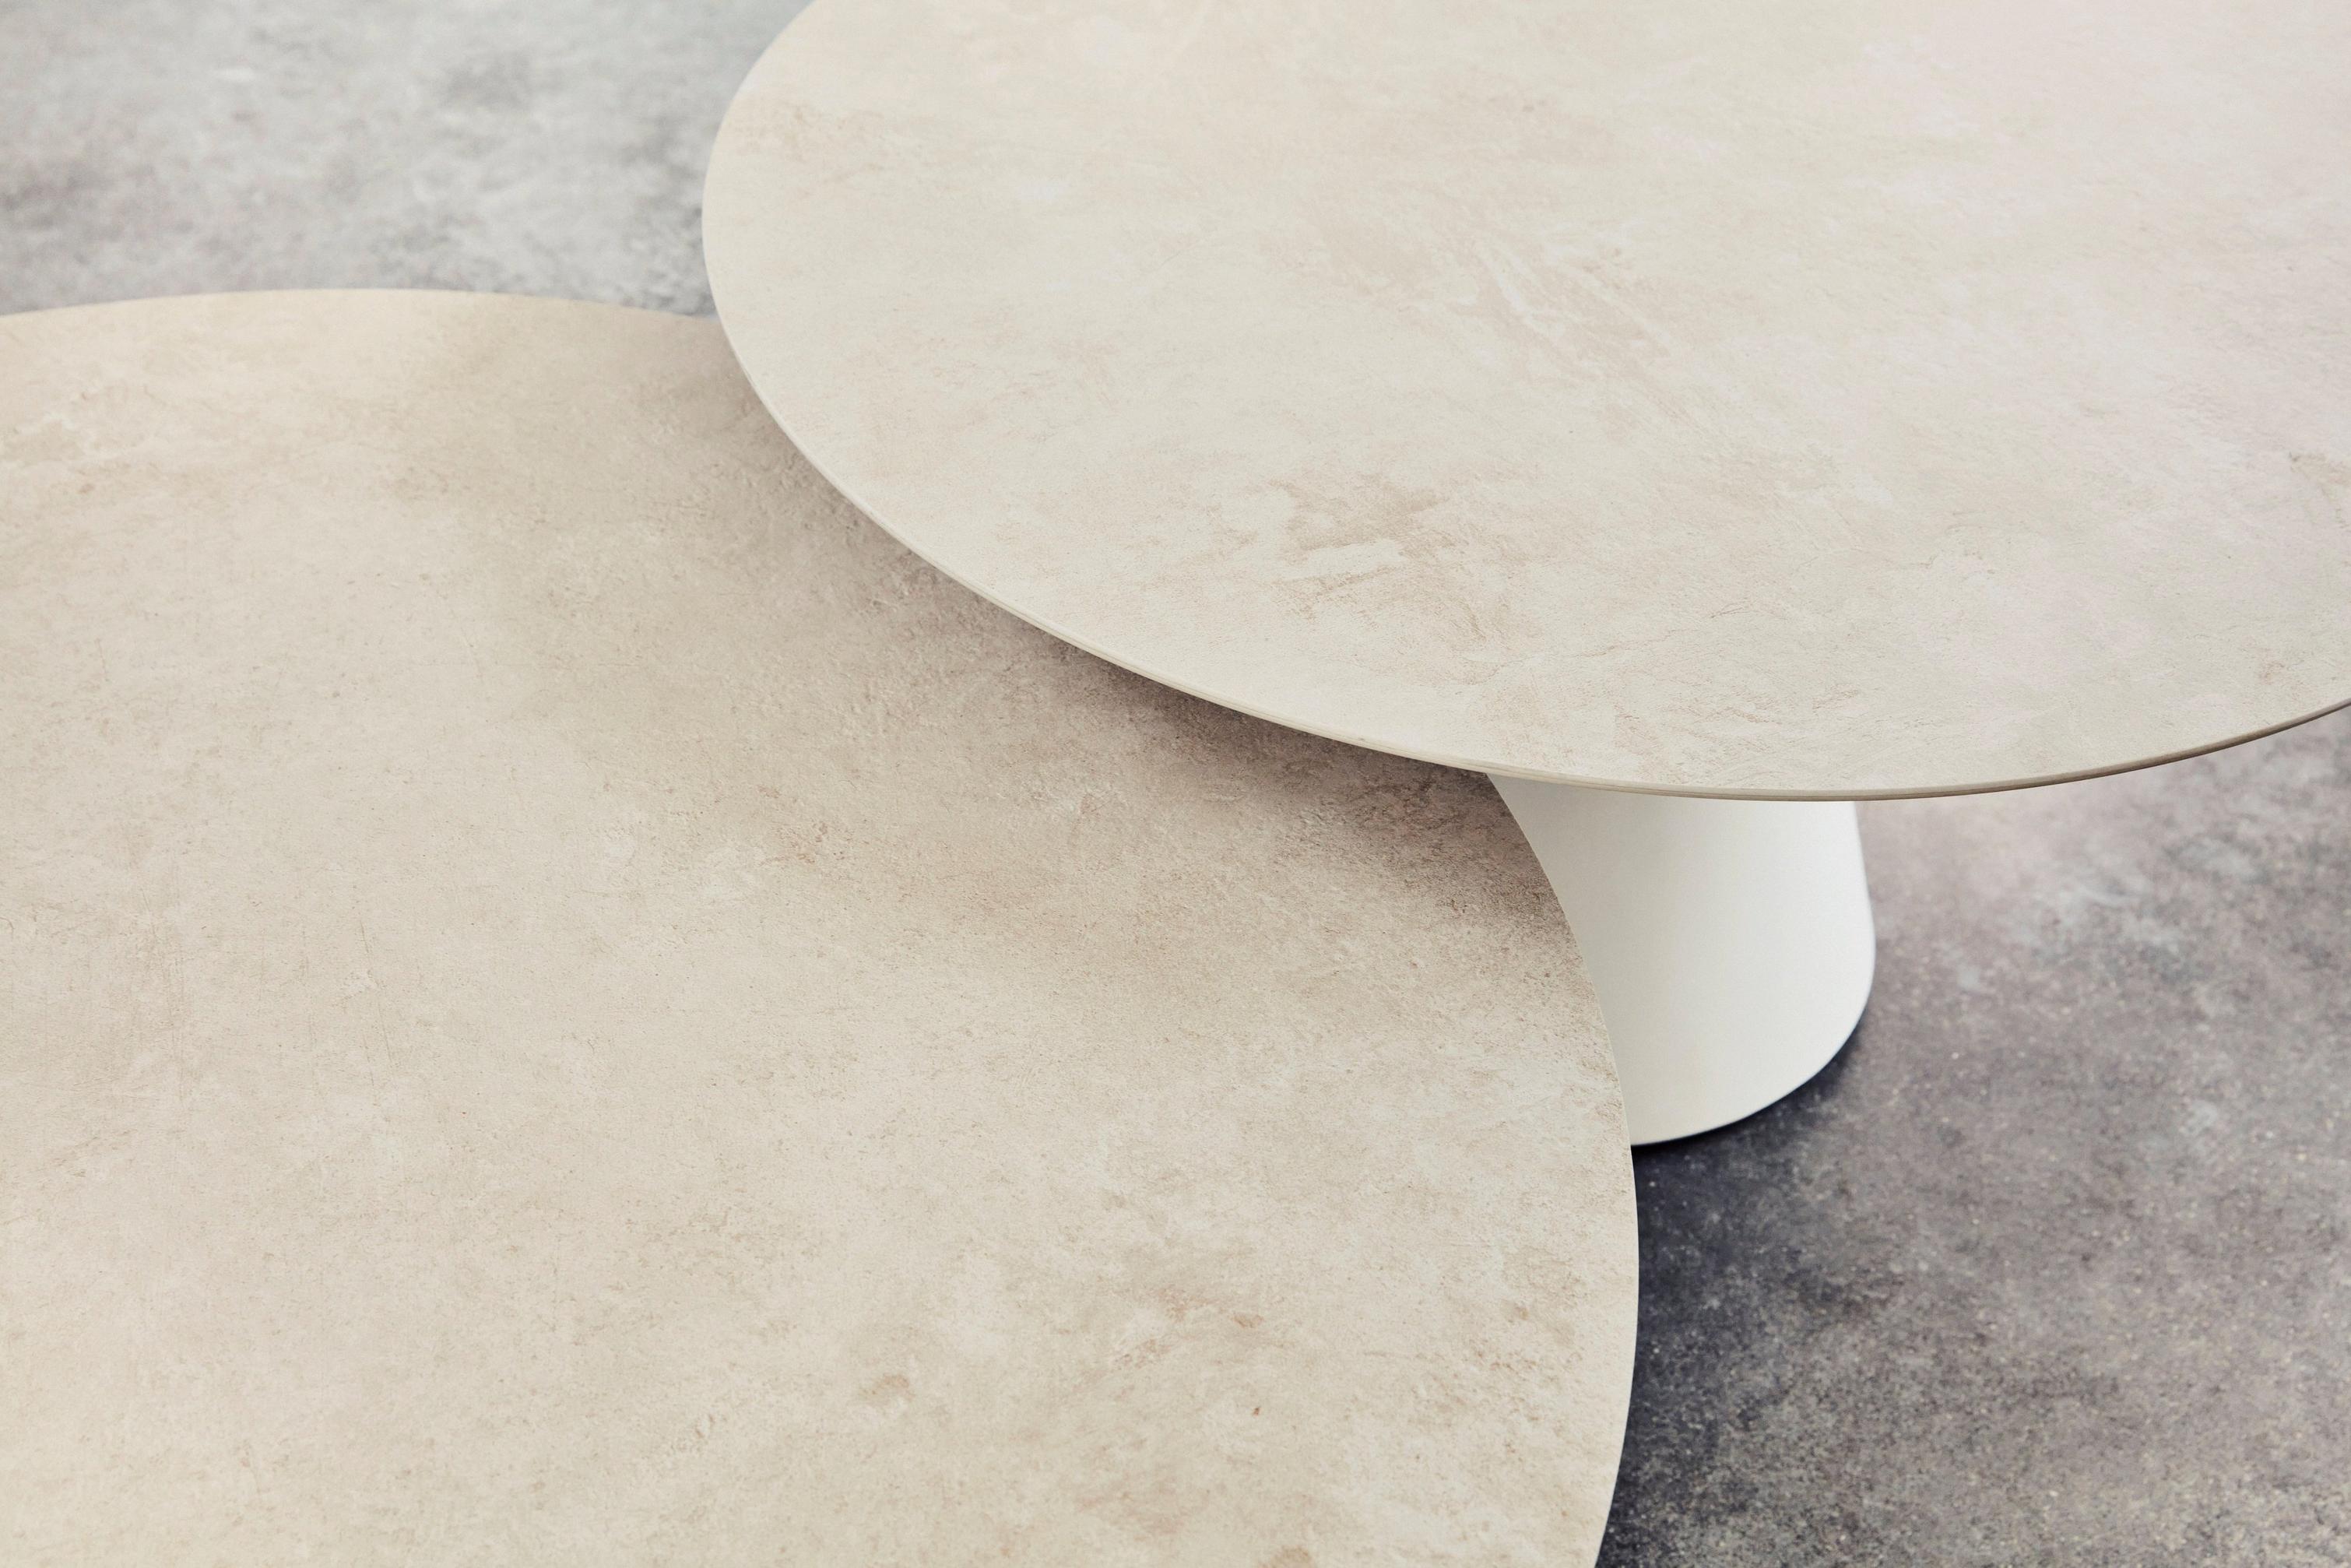 Two overlapping round ceramic Madrid tabletops with neutral tones